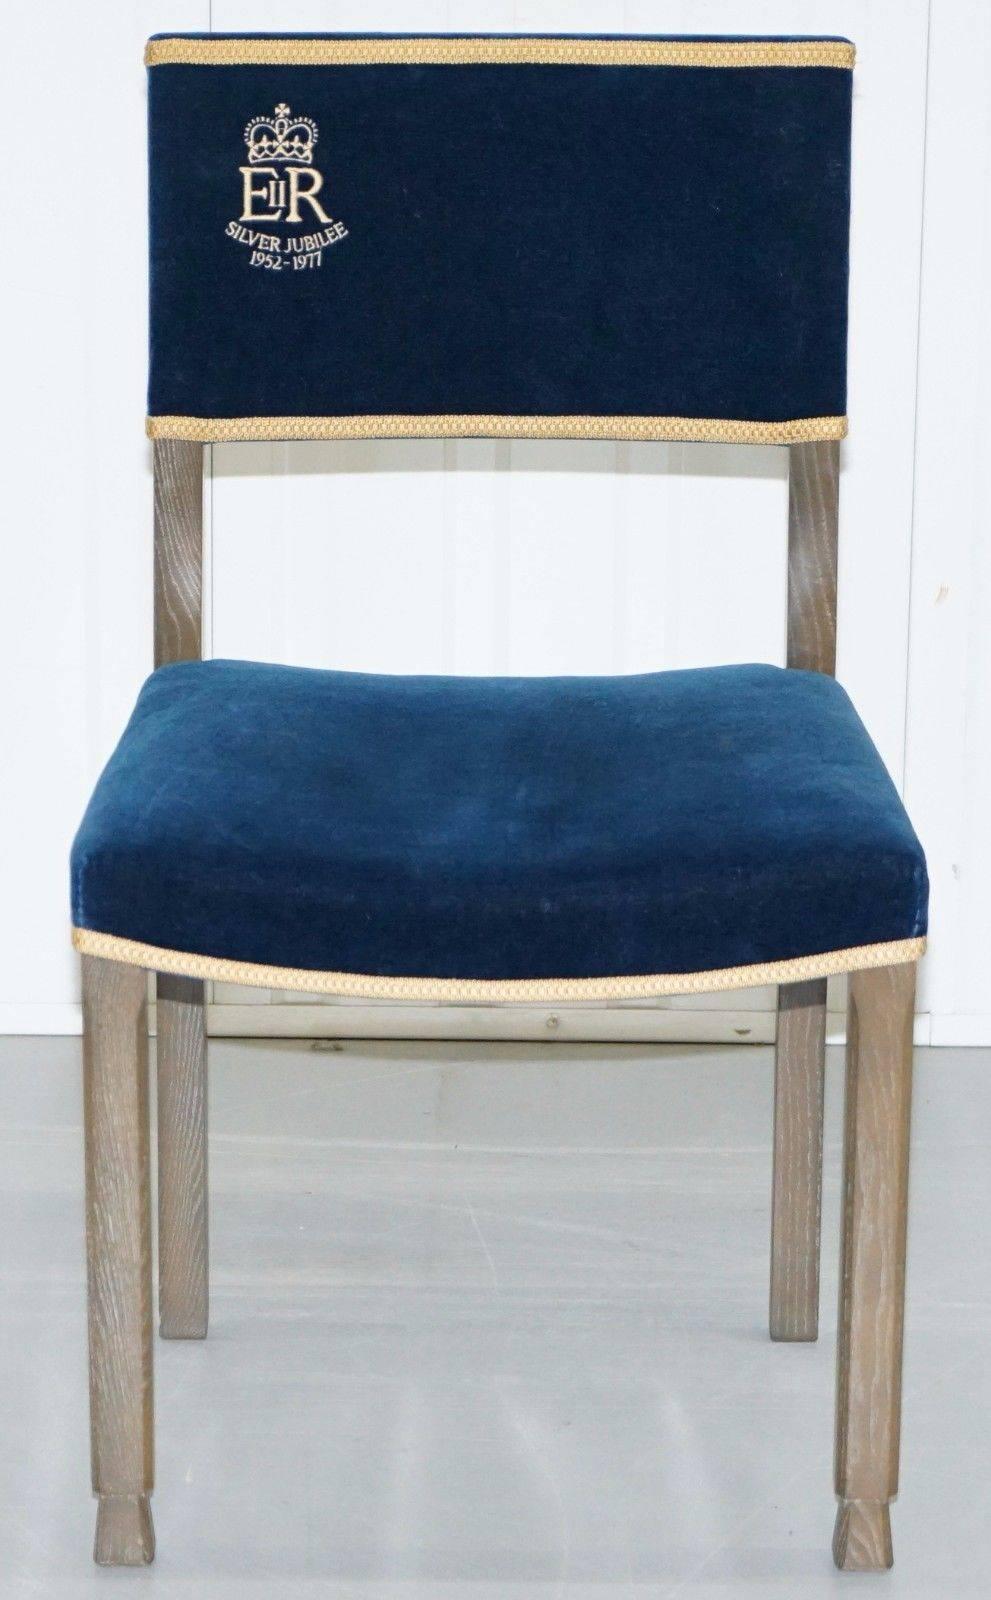 Nice and very rare original William Hands 1952-1977 Silver Jubilee anniversary edition Queen Elizabeth II Peers chair with Limed oak frame a premium royal blue velvet upholstery finished with gold threaded Queens crest

Please note the delivery fee